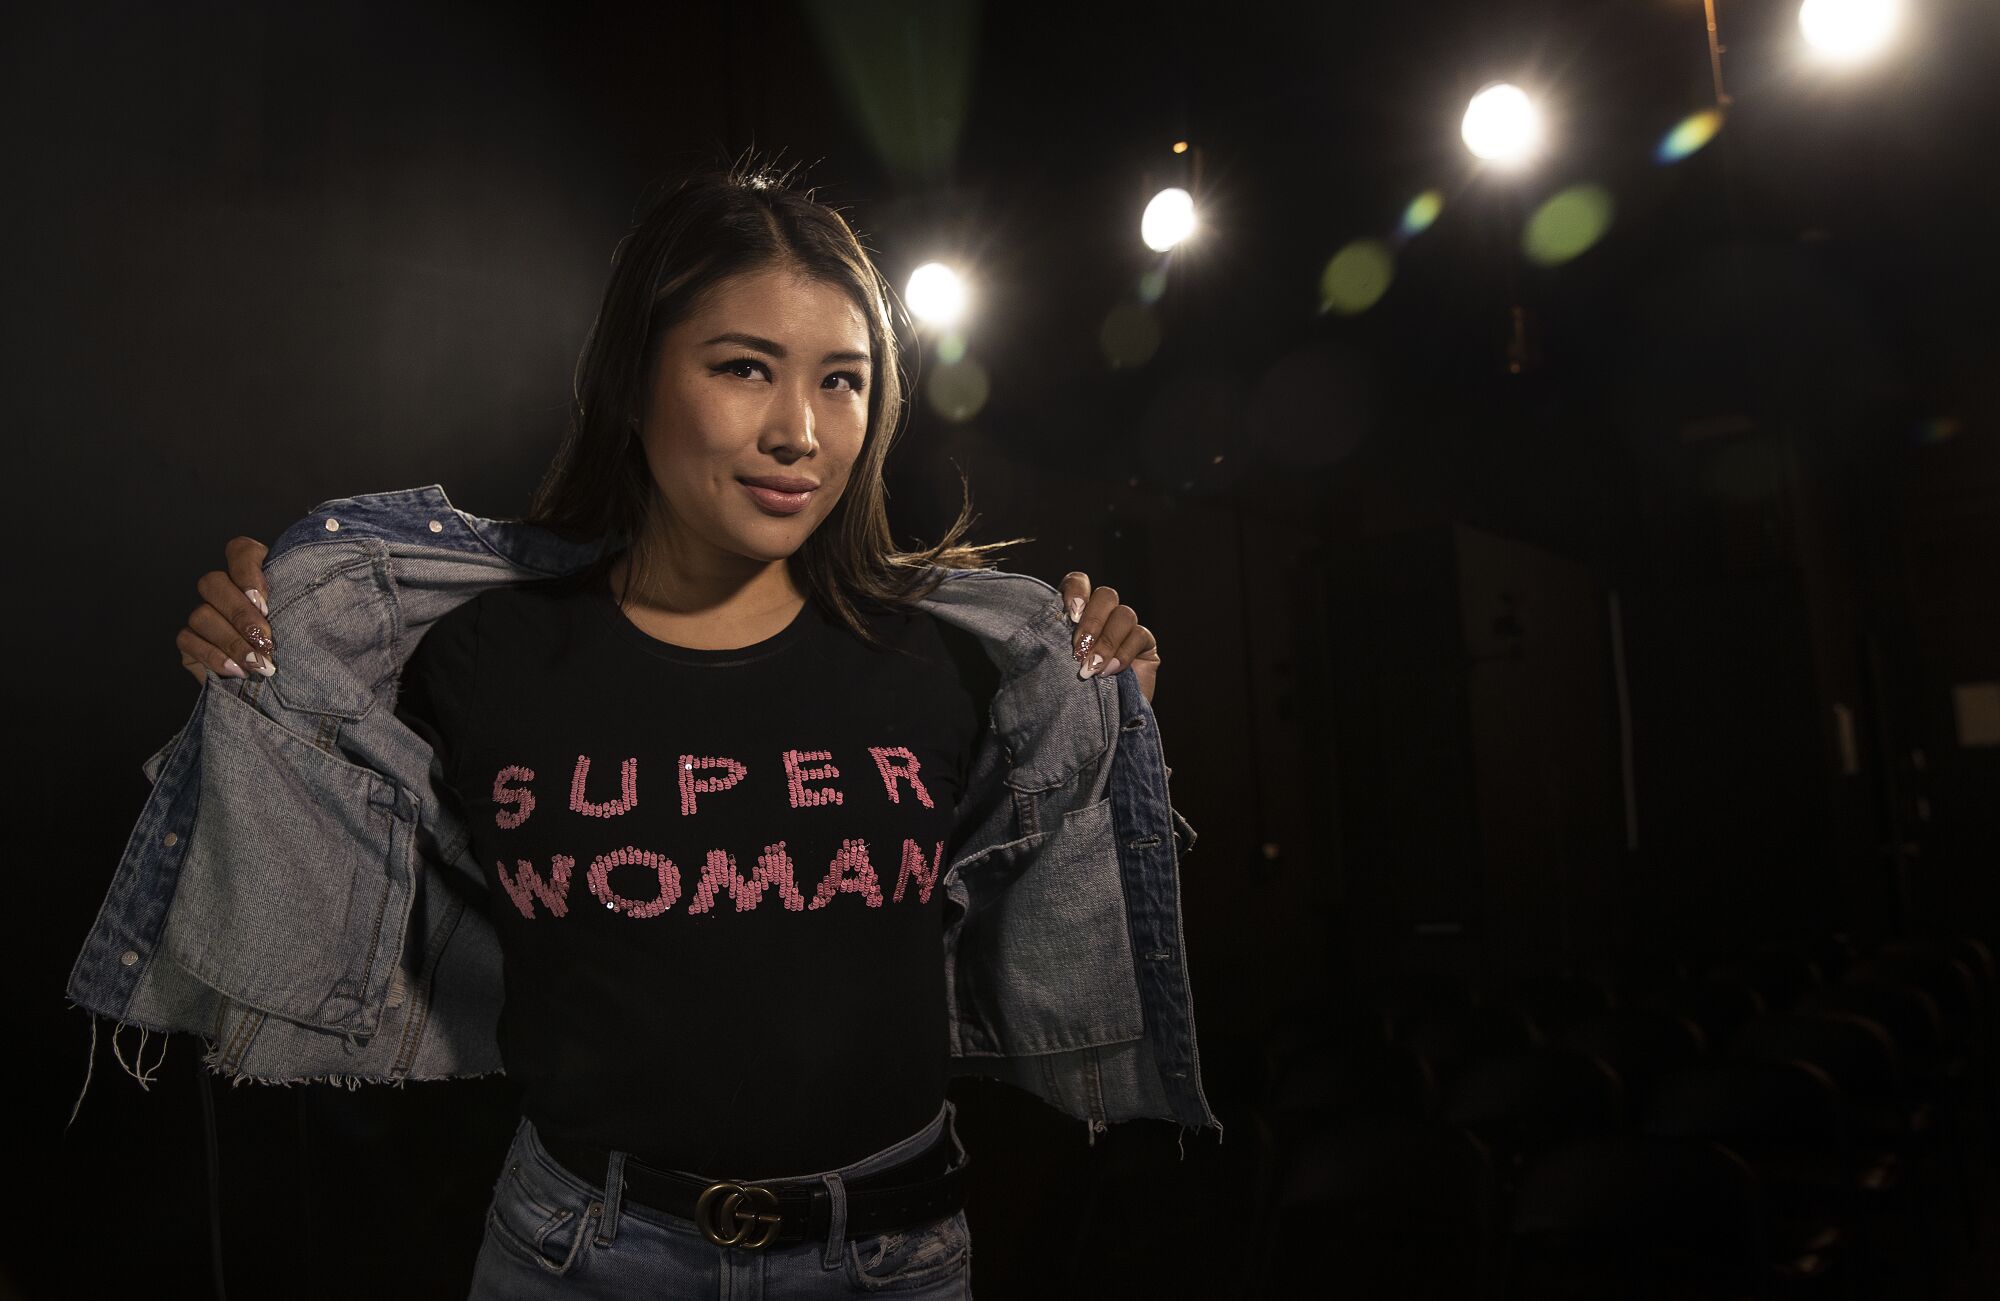 A woman holds open a jean jacket showing herself wearing a t-shirt reading "super woman"